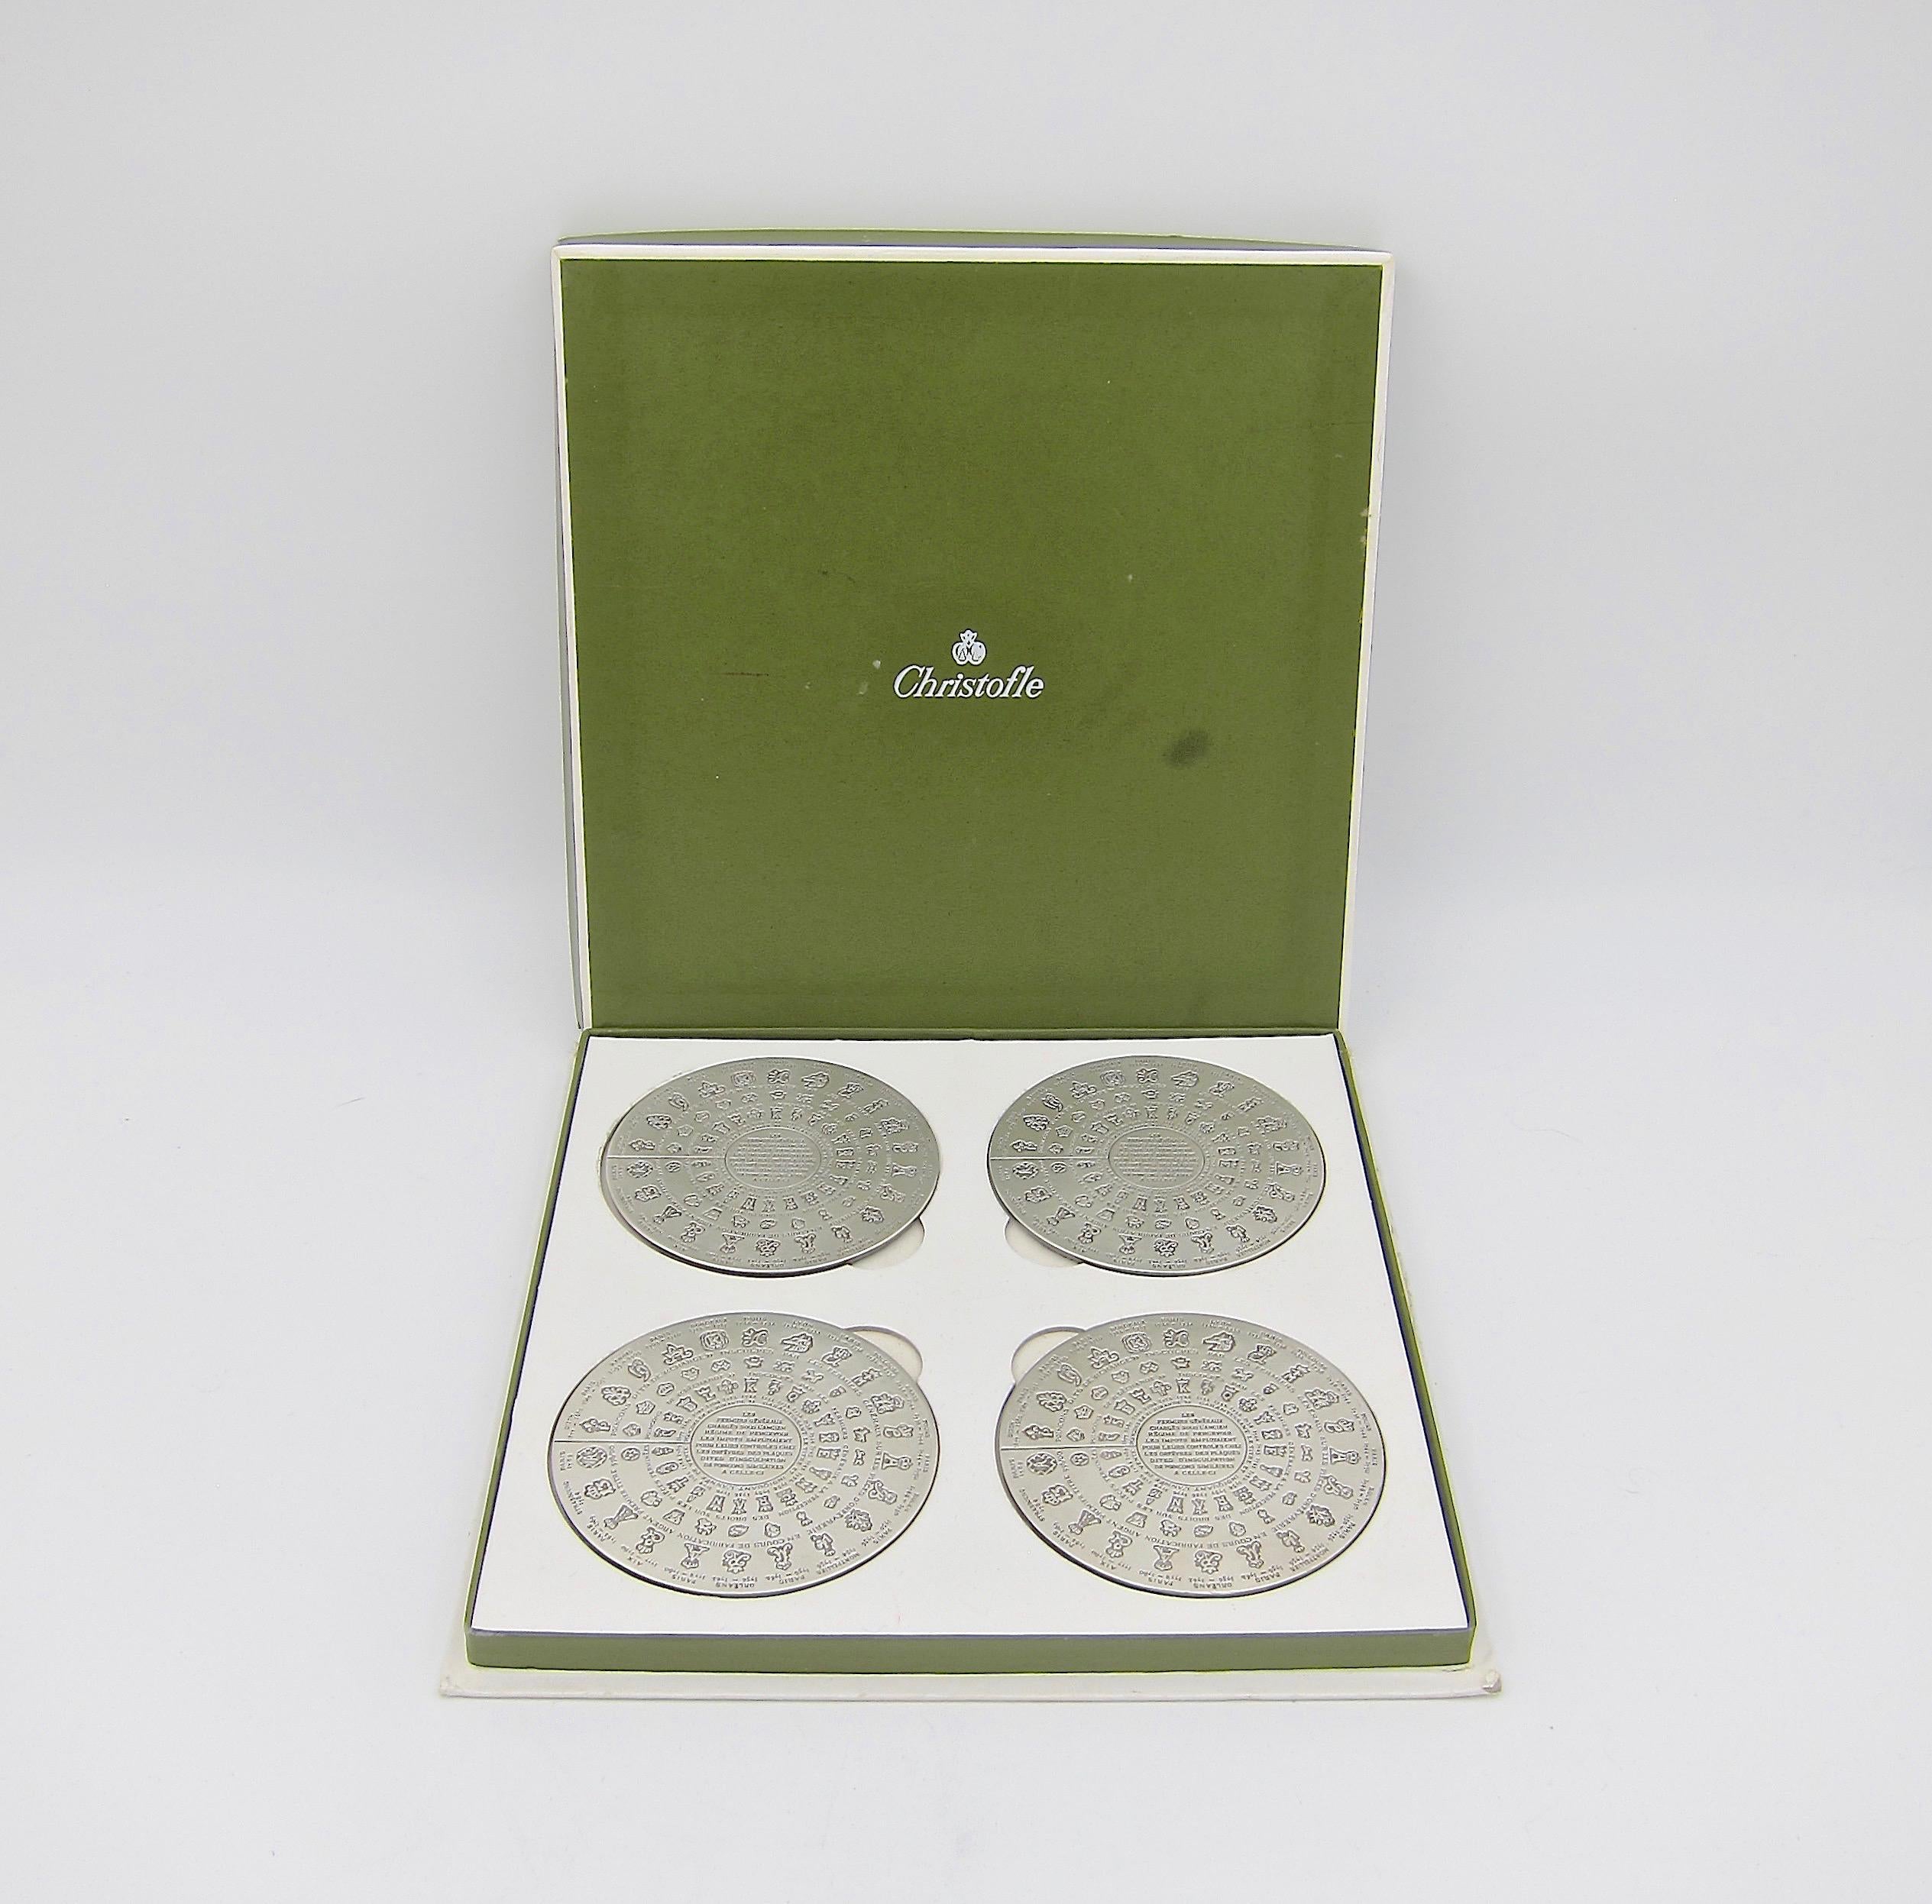 A Christofle of Paris set of 4 vintage coasters commemorating the Farmers Généraux, a 17th and 18th century tax collecting organization charged with collecting duties on behalf of the King of France. The marks on these pieces are copies of the